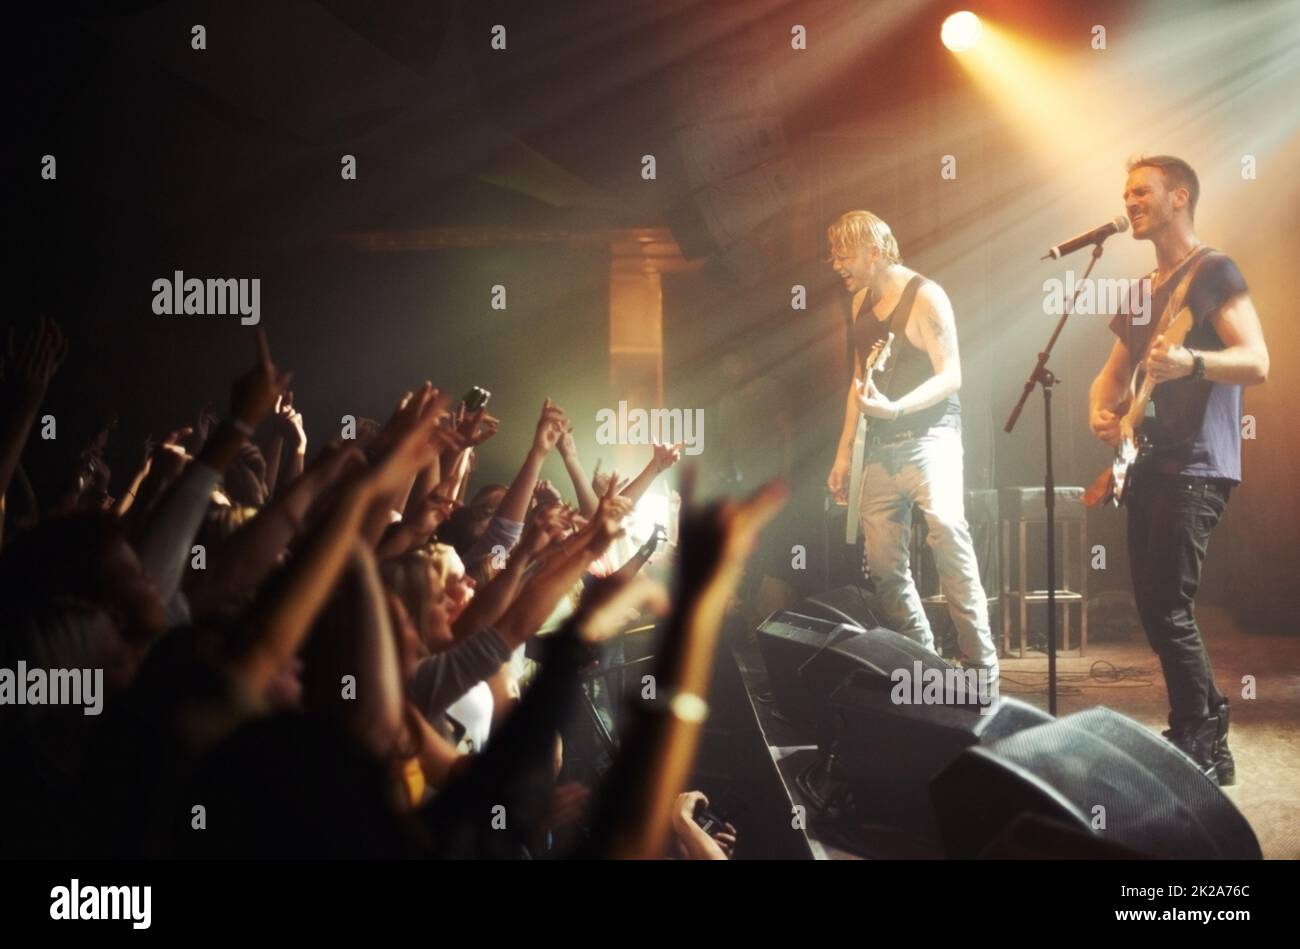 Shot of a crowd of music fans reaching up at a guitarist on stage. This concert was created for the sole purpose of this photo shoot, featuring 300 models and 3 live bands. All people in this shoot are model released. Stock Photo